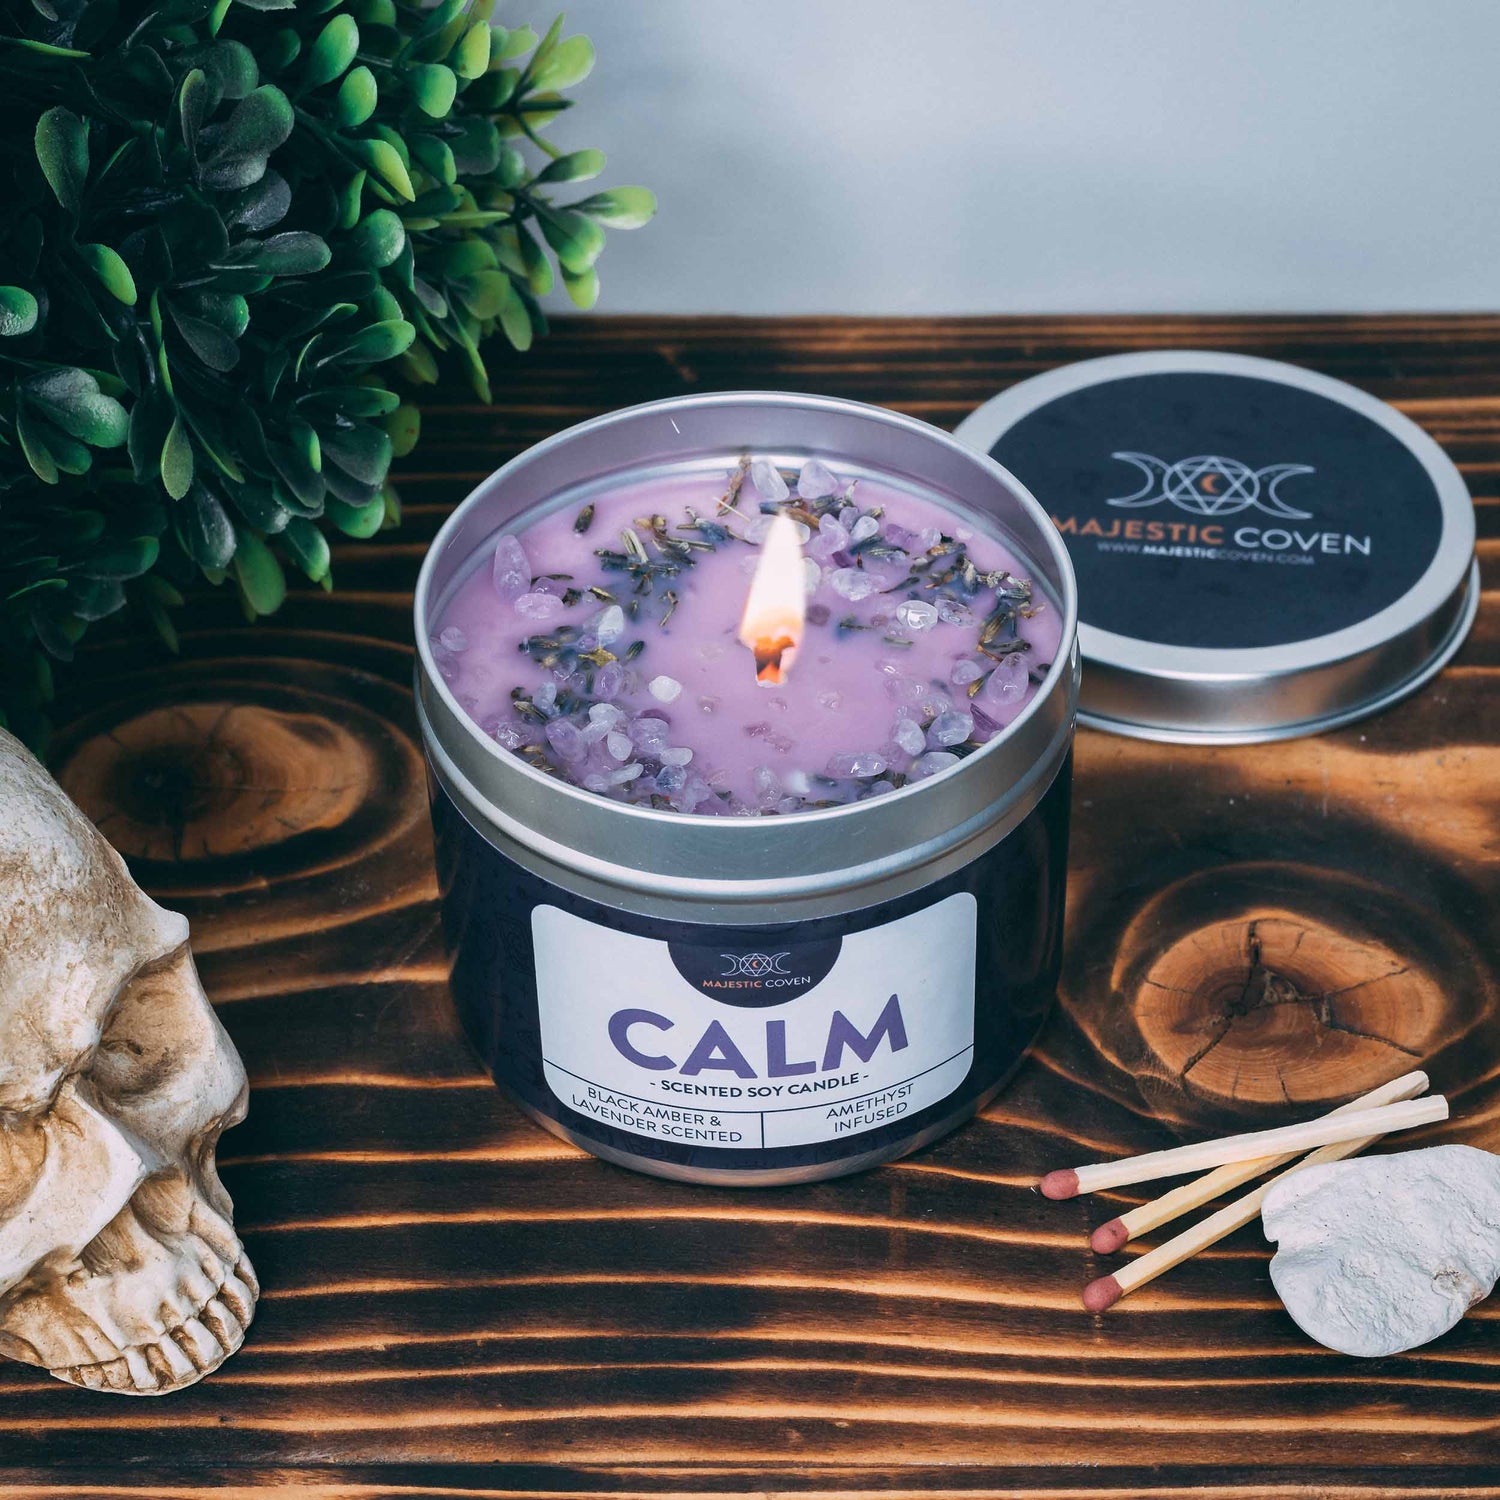 Calm - Amethyst Infused Crystal Soy Candle (WS) Majestic Coven